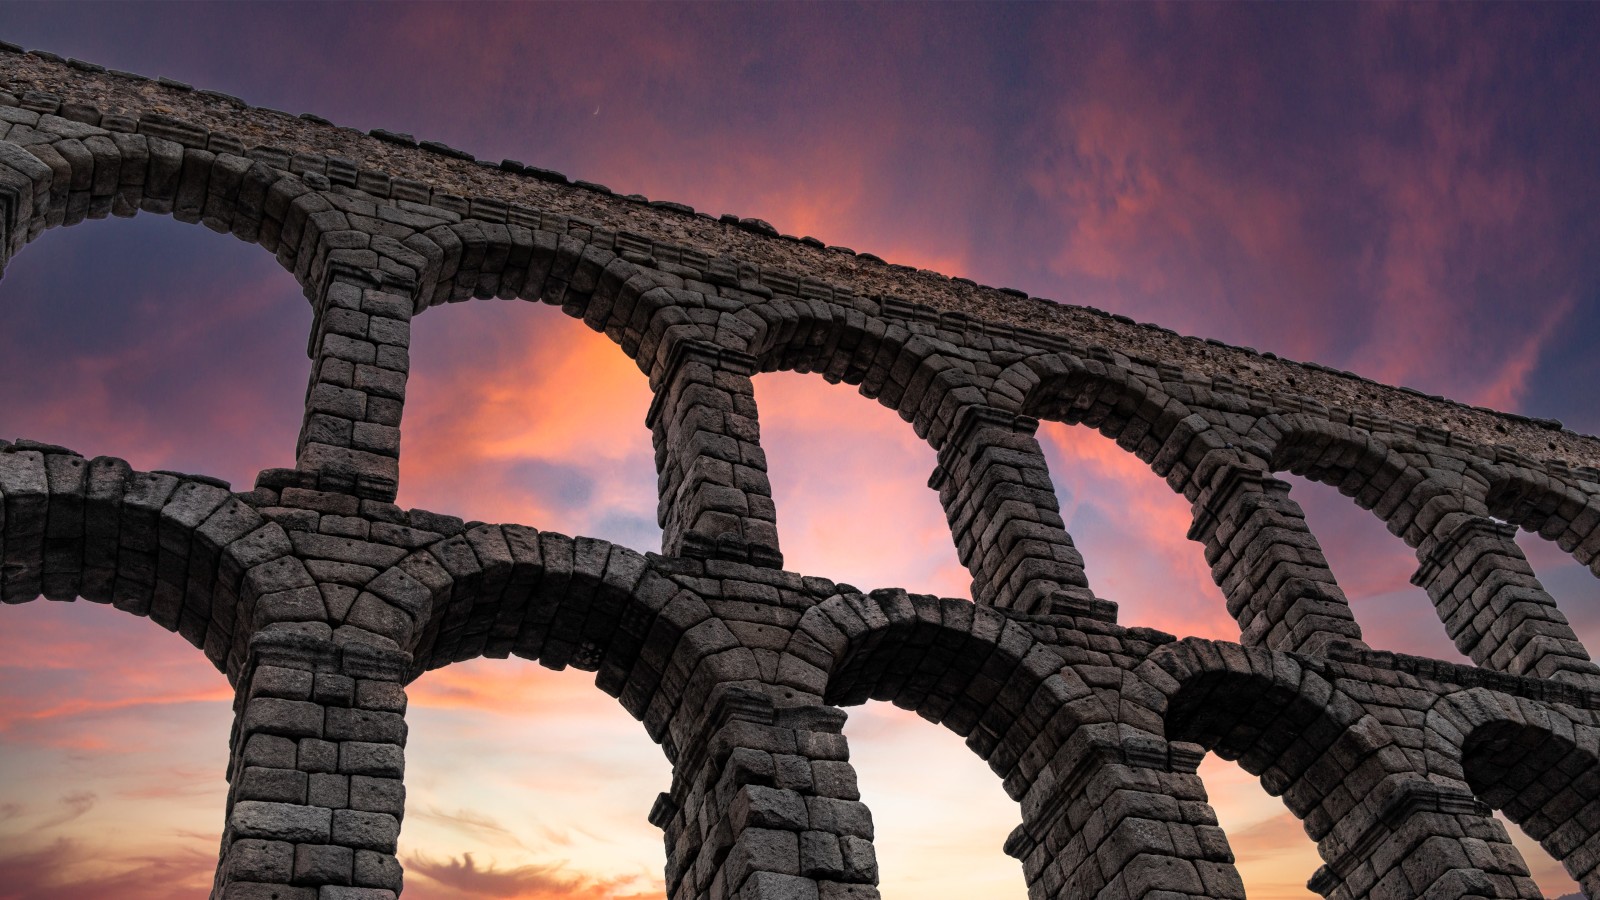 Stone arches of Segovia in Madrid, Spain with a pink and yellow sunset in the sky